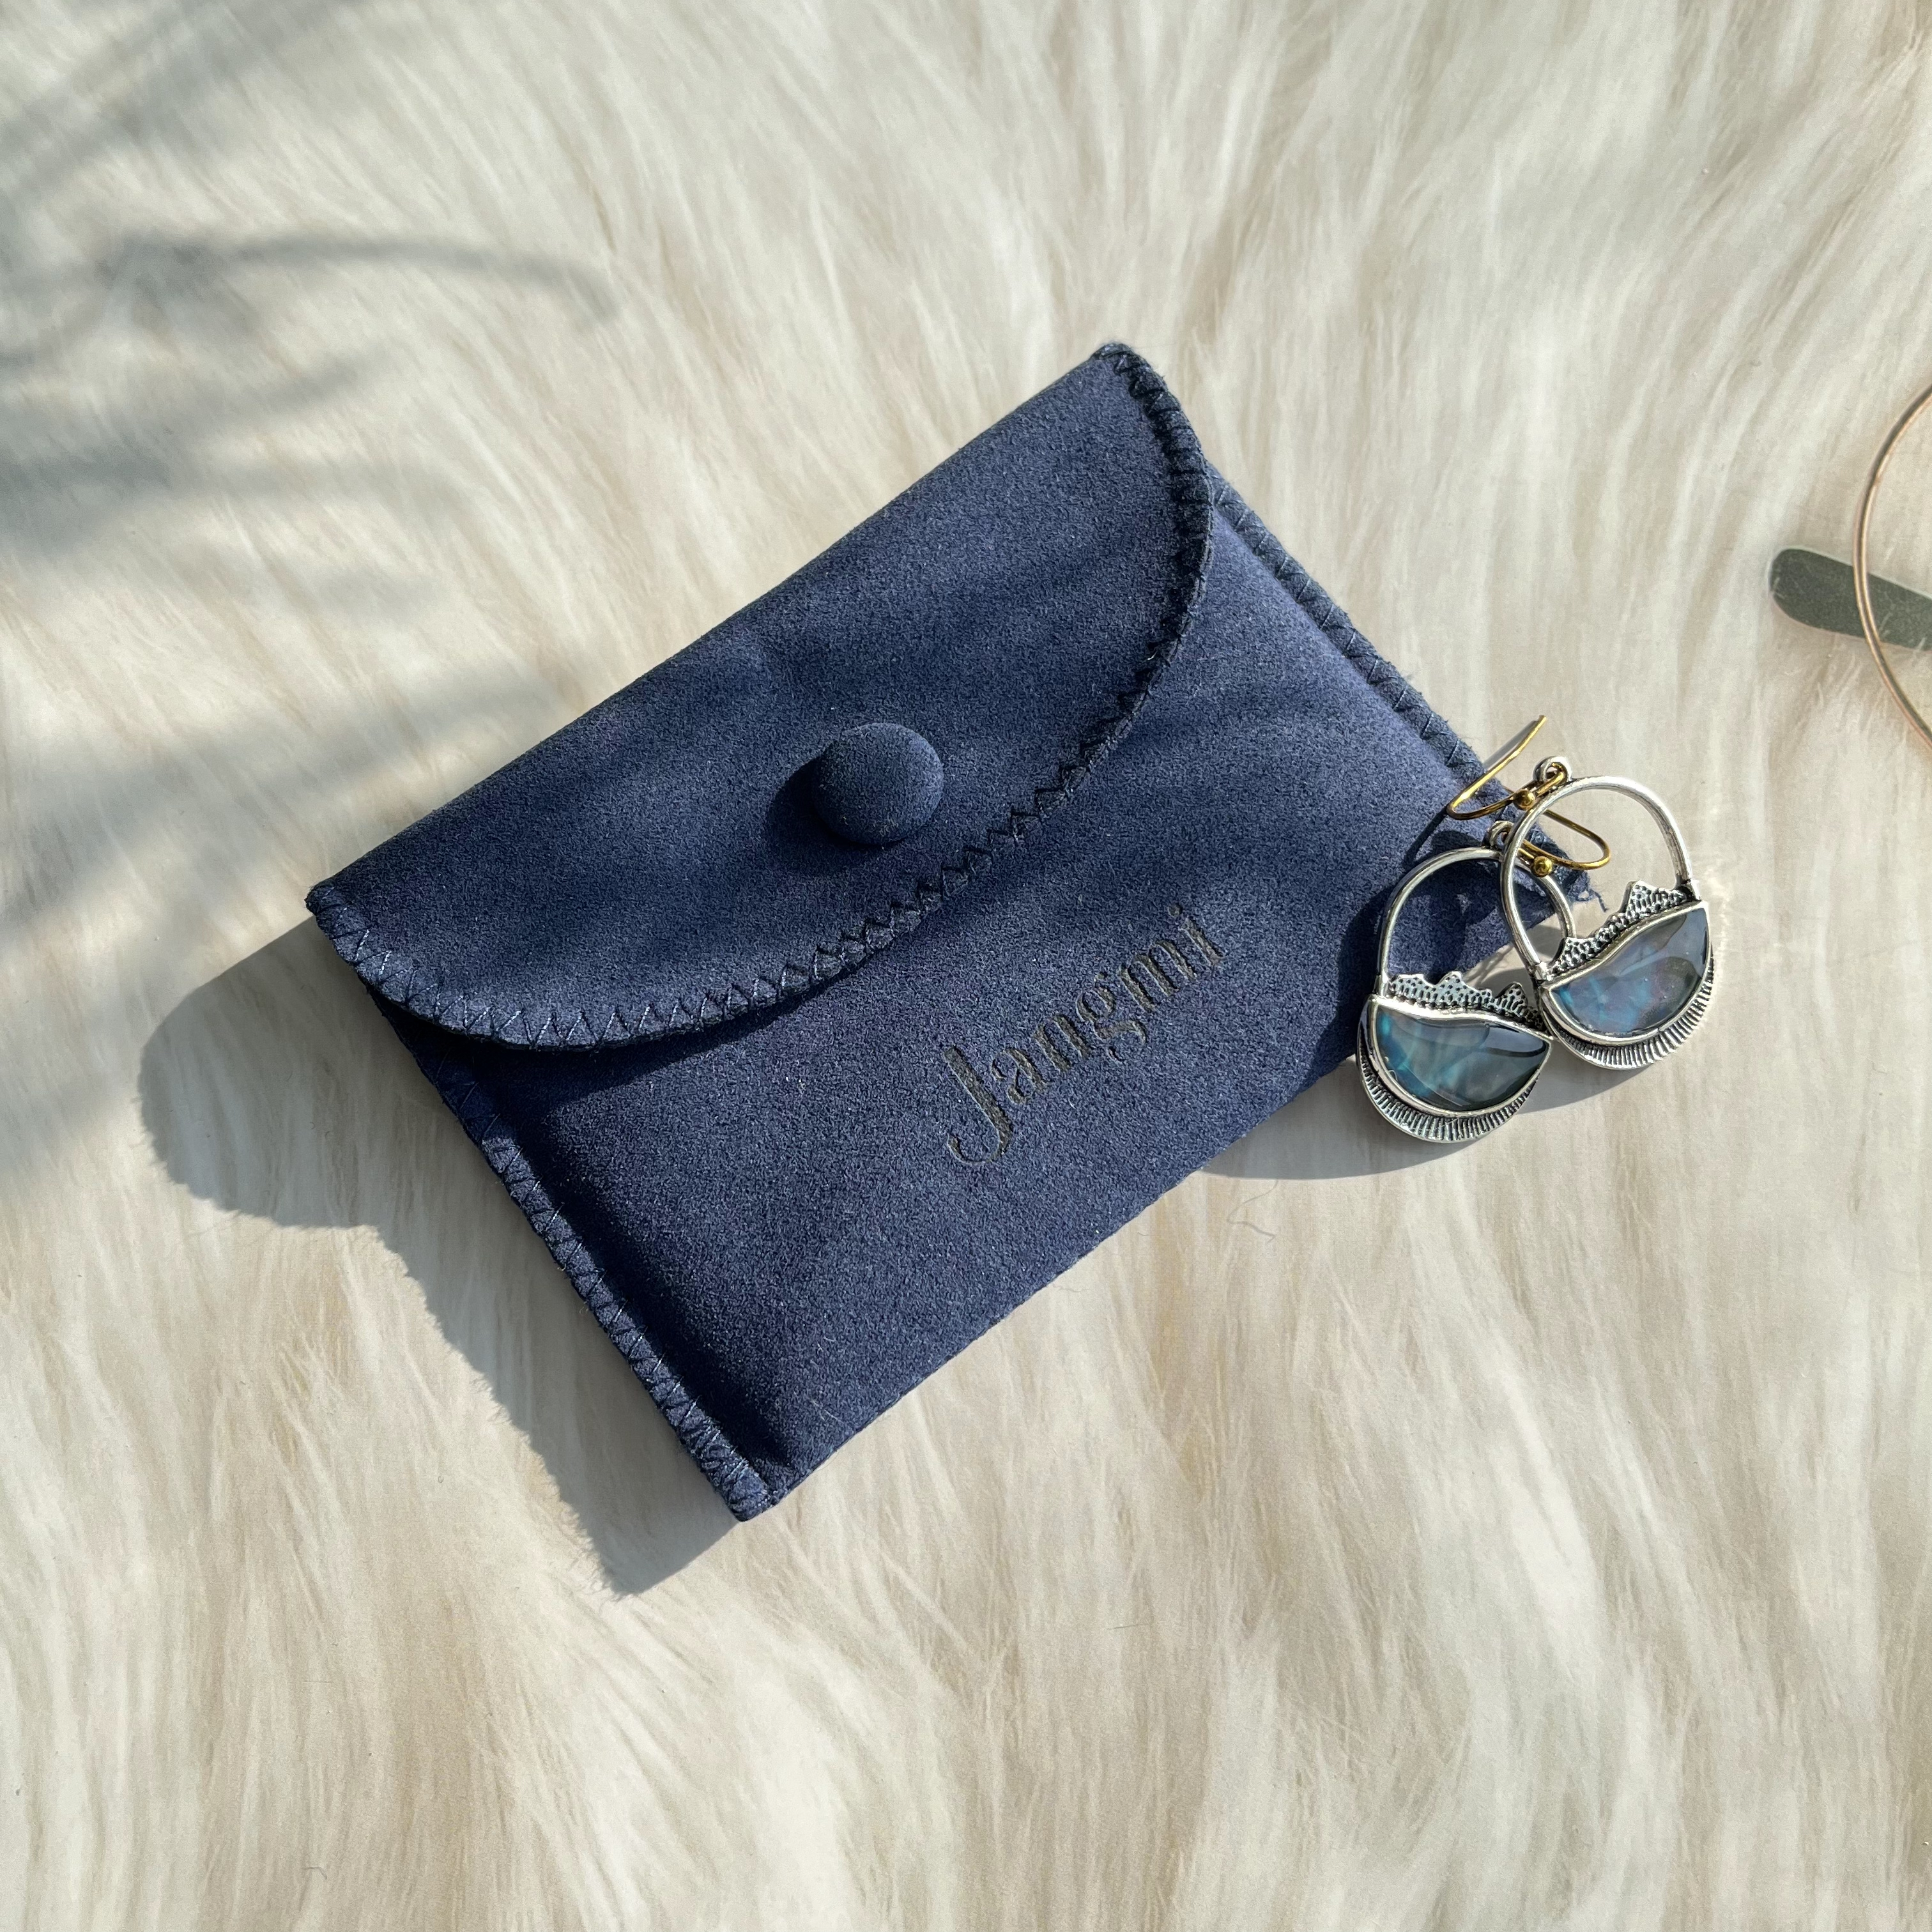 Royal Blue microfiber jewelry pouch with stitching around